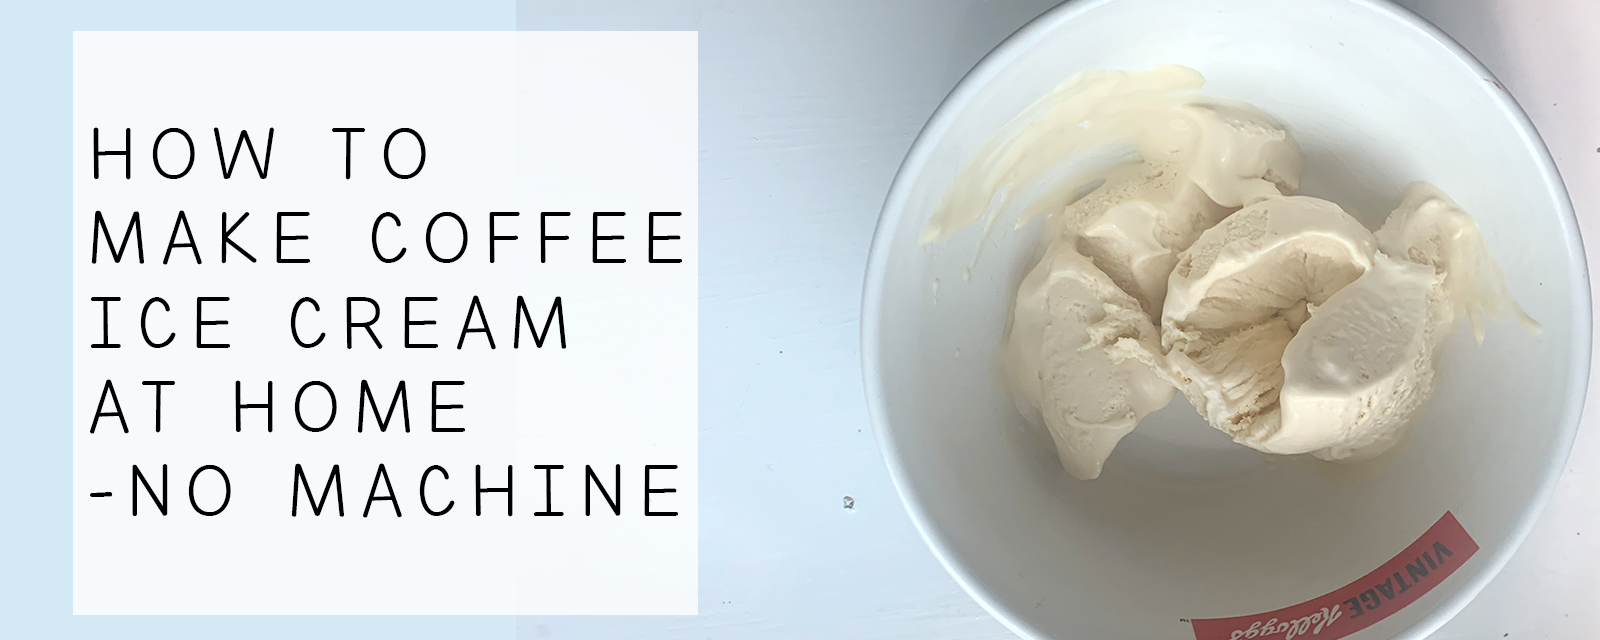 How to Make Coffee ice Cream without a machine